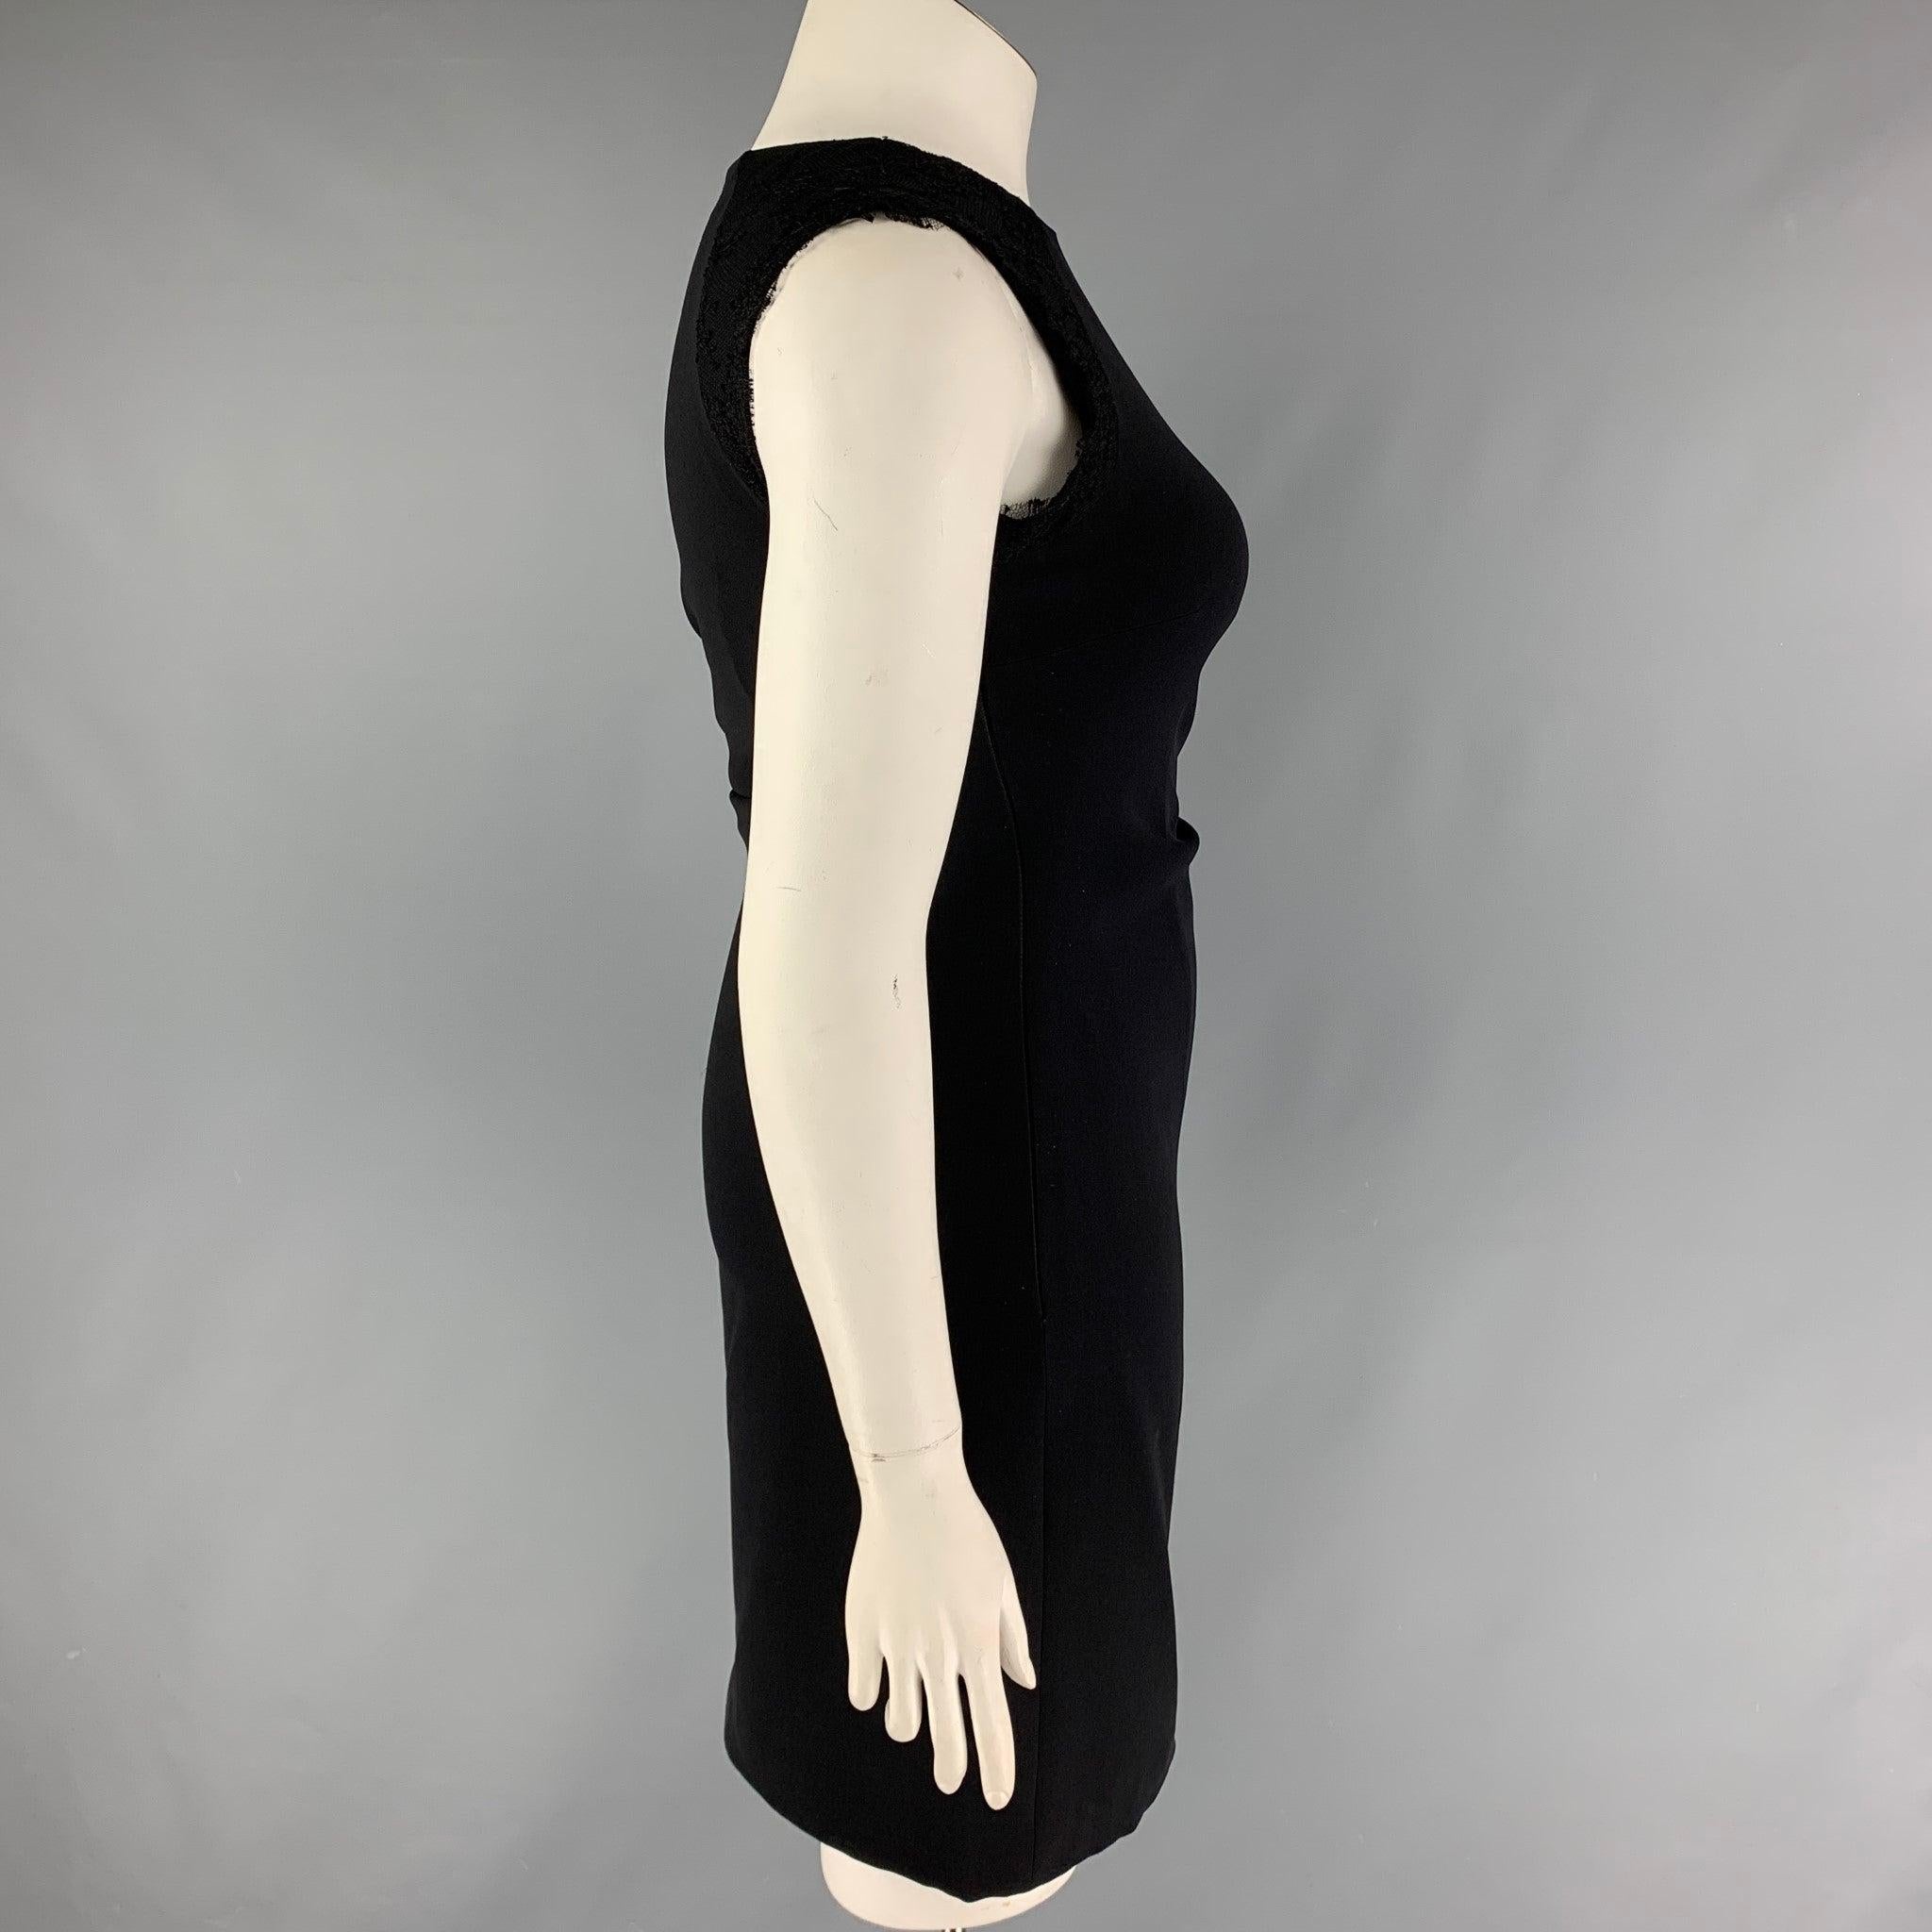 MONIQUE LHUILLIER dress comes in a black viscose / polyester with a silk lining featuring silk lace details, shift style, sleeveless, and a side zip up closure,
Very Good
Pre-Owned Condition. 

Marked:   10 

Measurements: 
 
Shoulder: 14 inches 